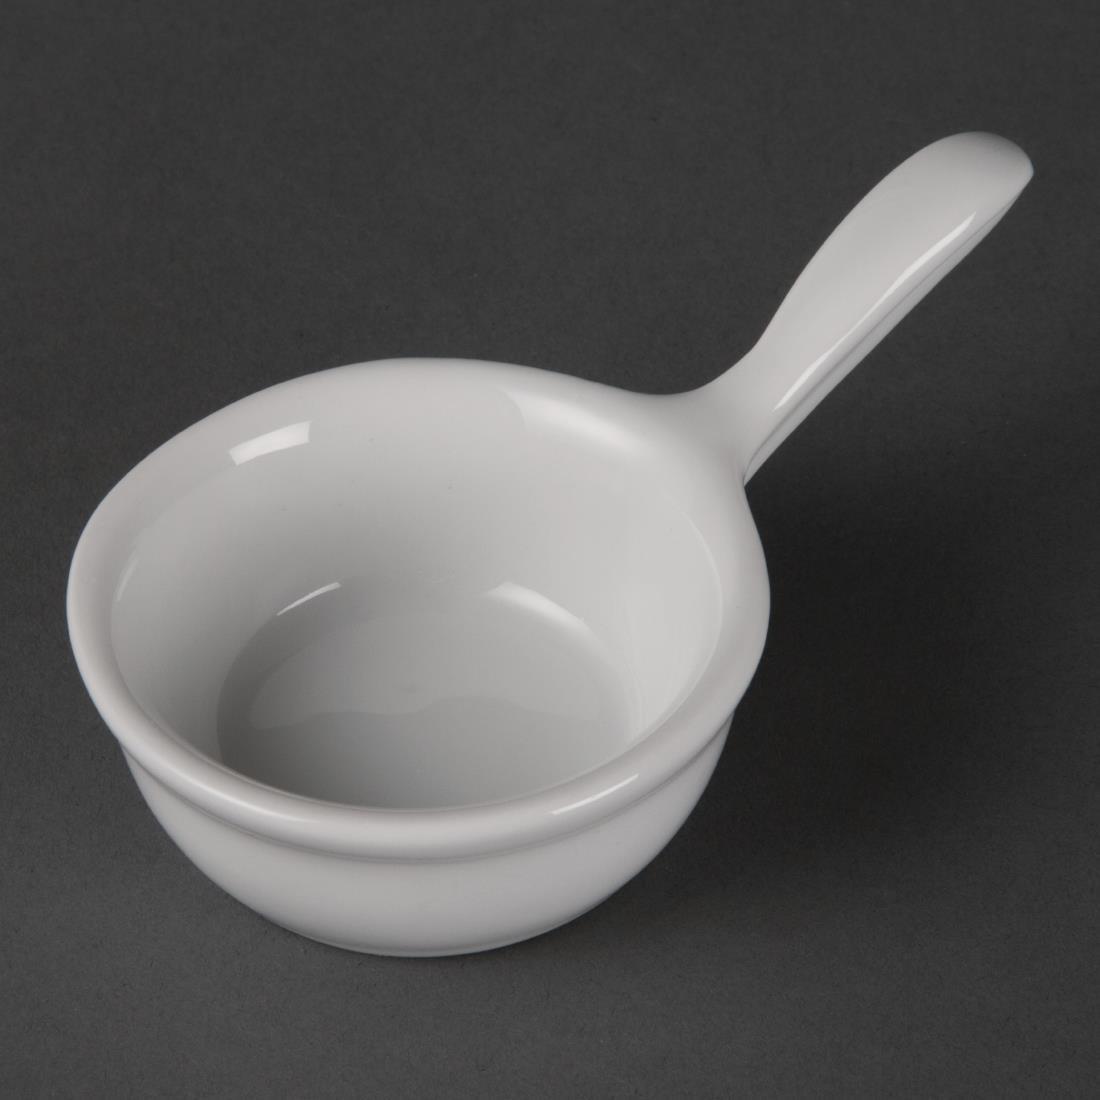 Olympia Miniature Pan Shaped Bowls 35ml 1.2oz (Pack of 12) - CE544  - 2